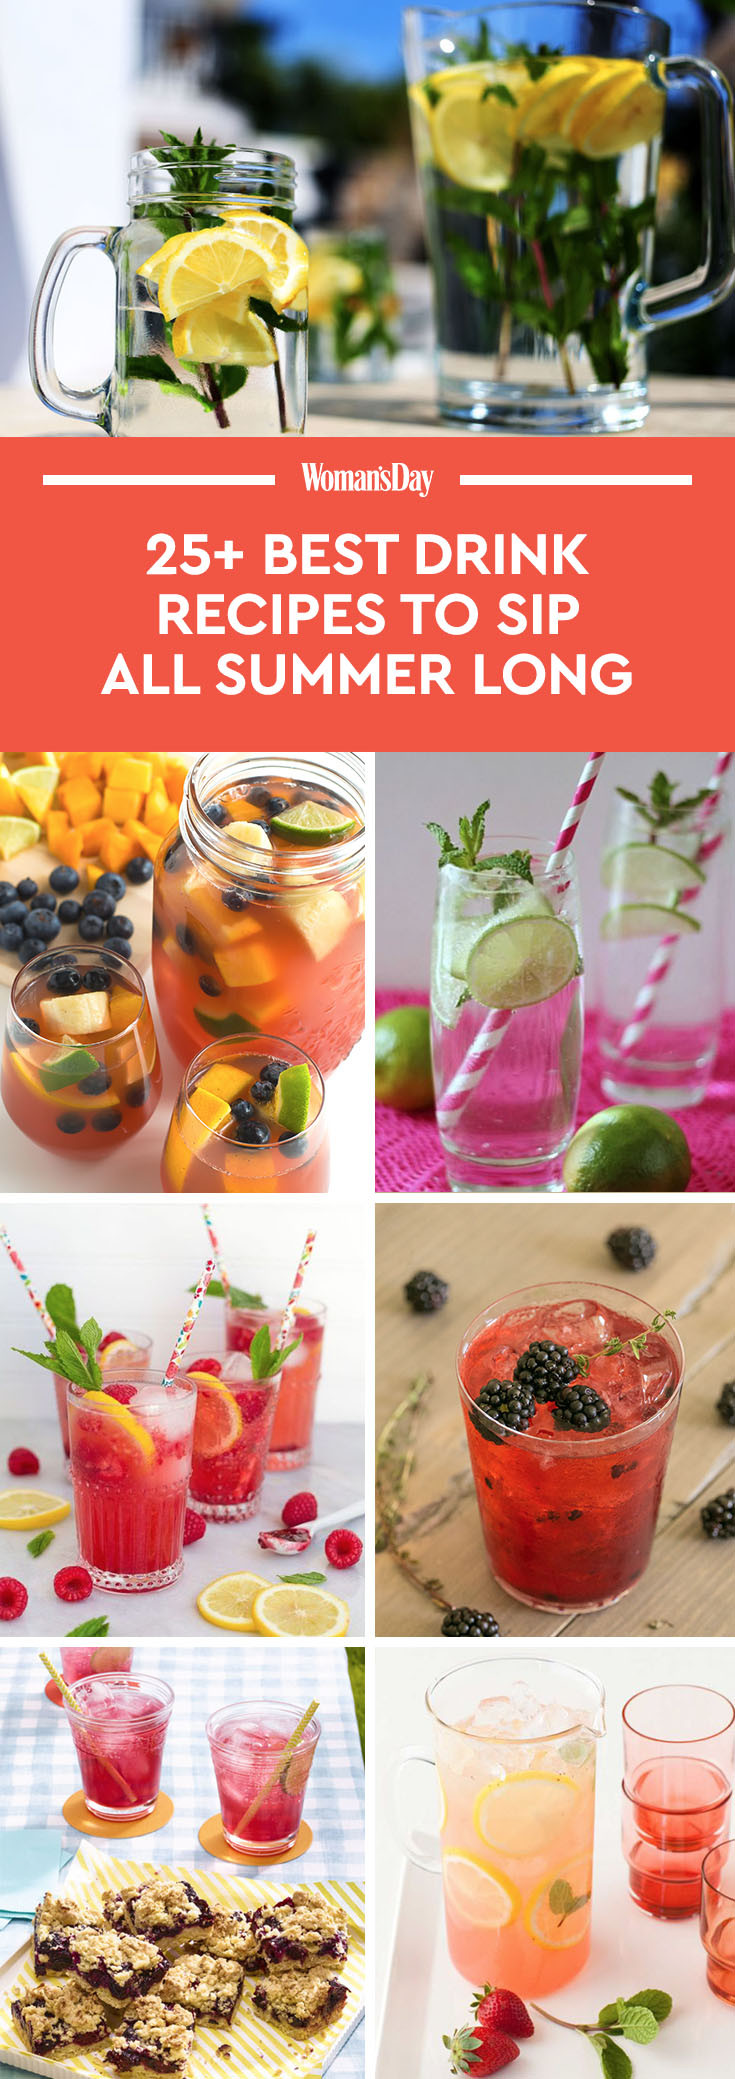 Summer Drink Recipe Alcoholic
 33 Best Summer Drink Recipes Easy Non Alcoholic Summer